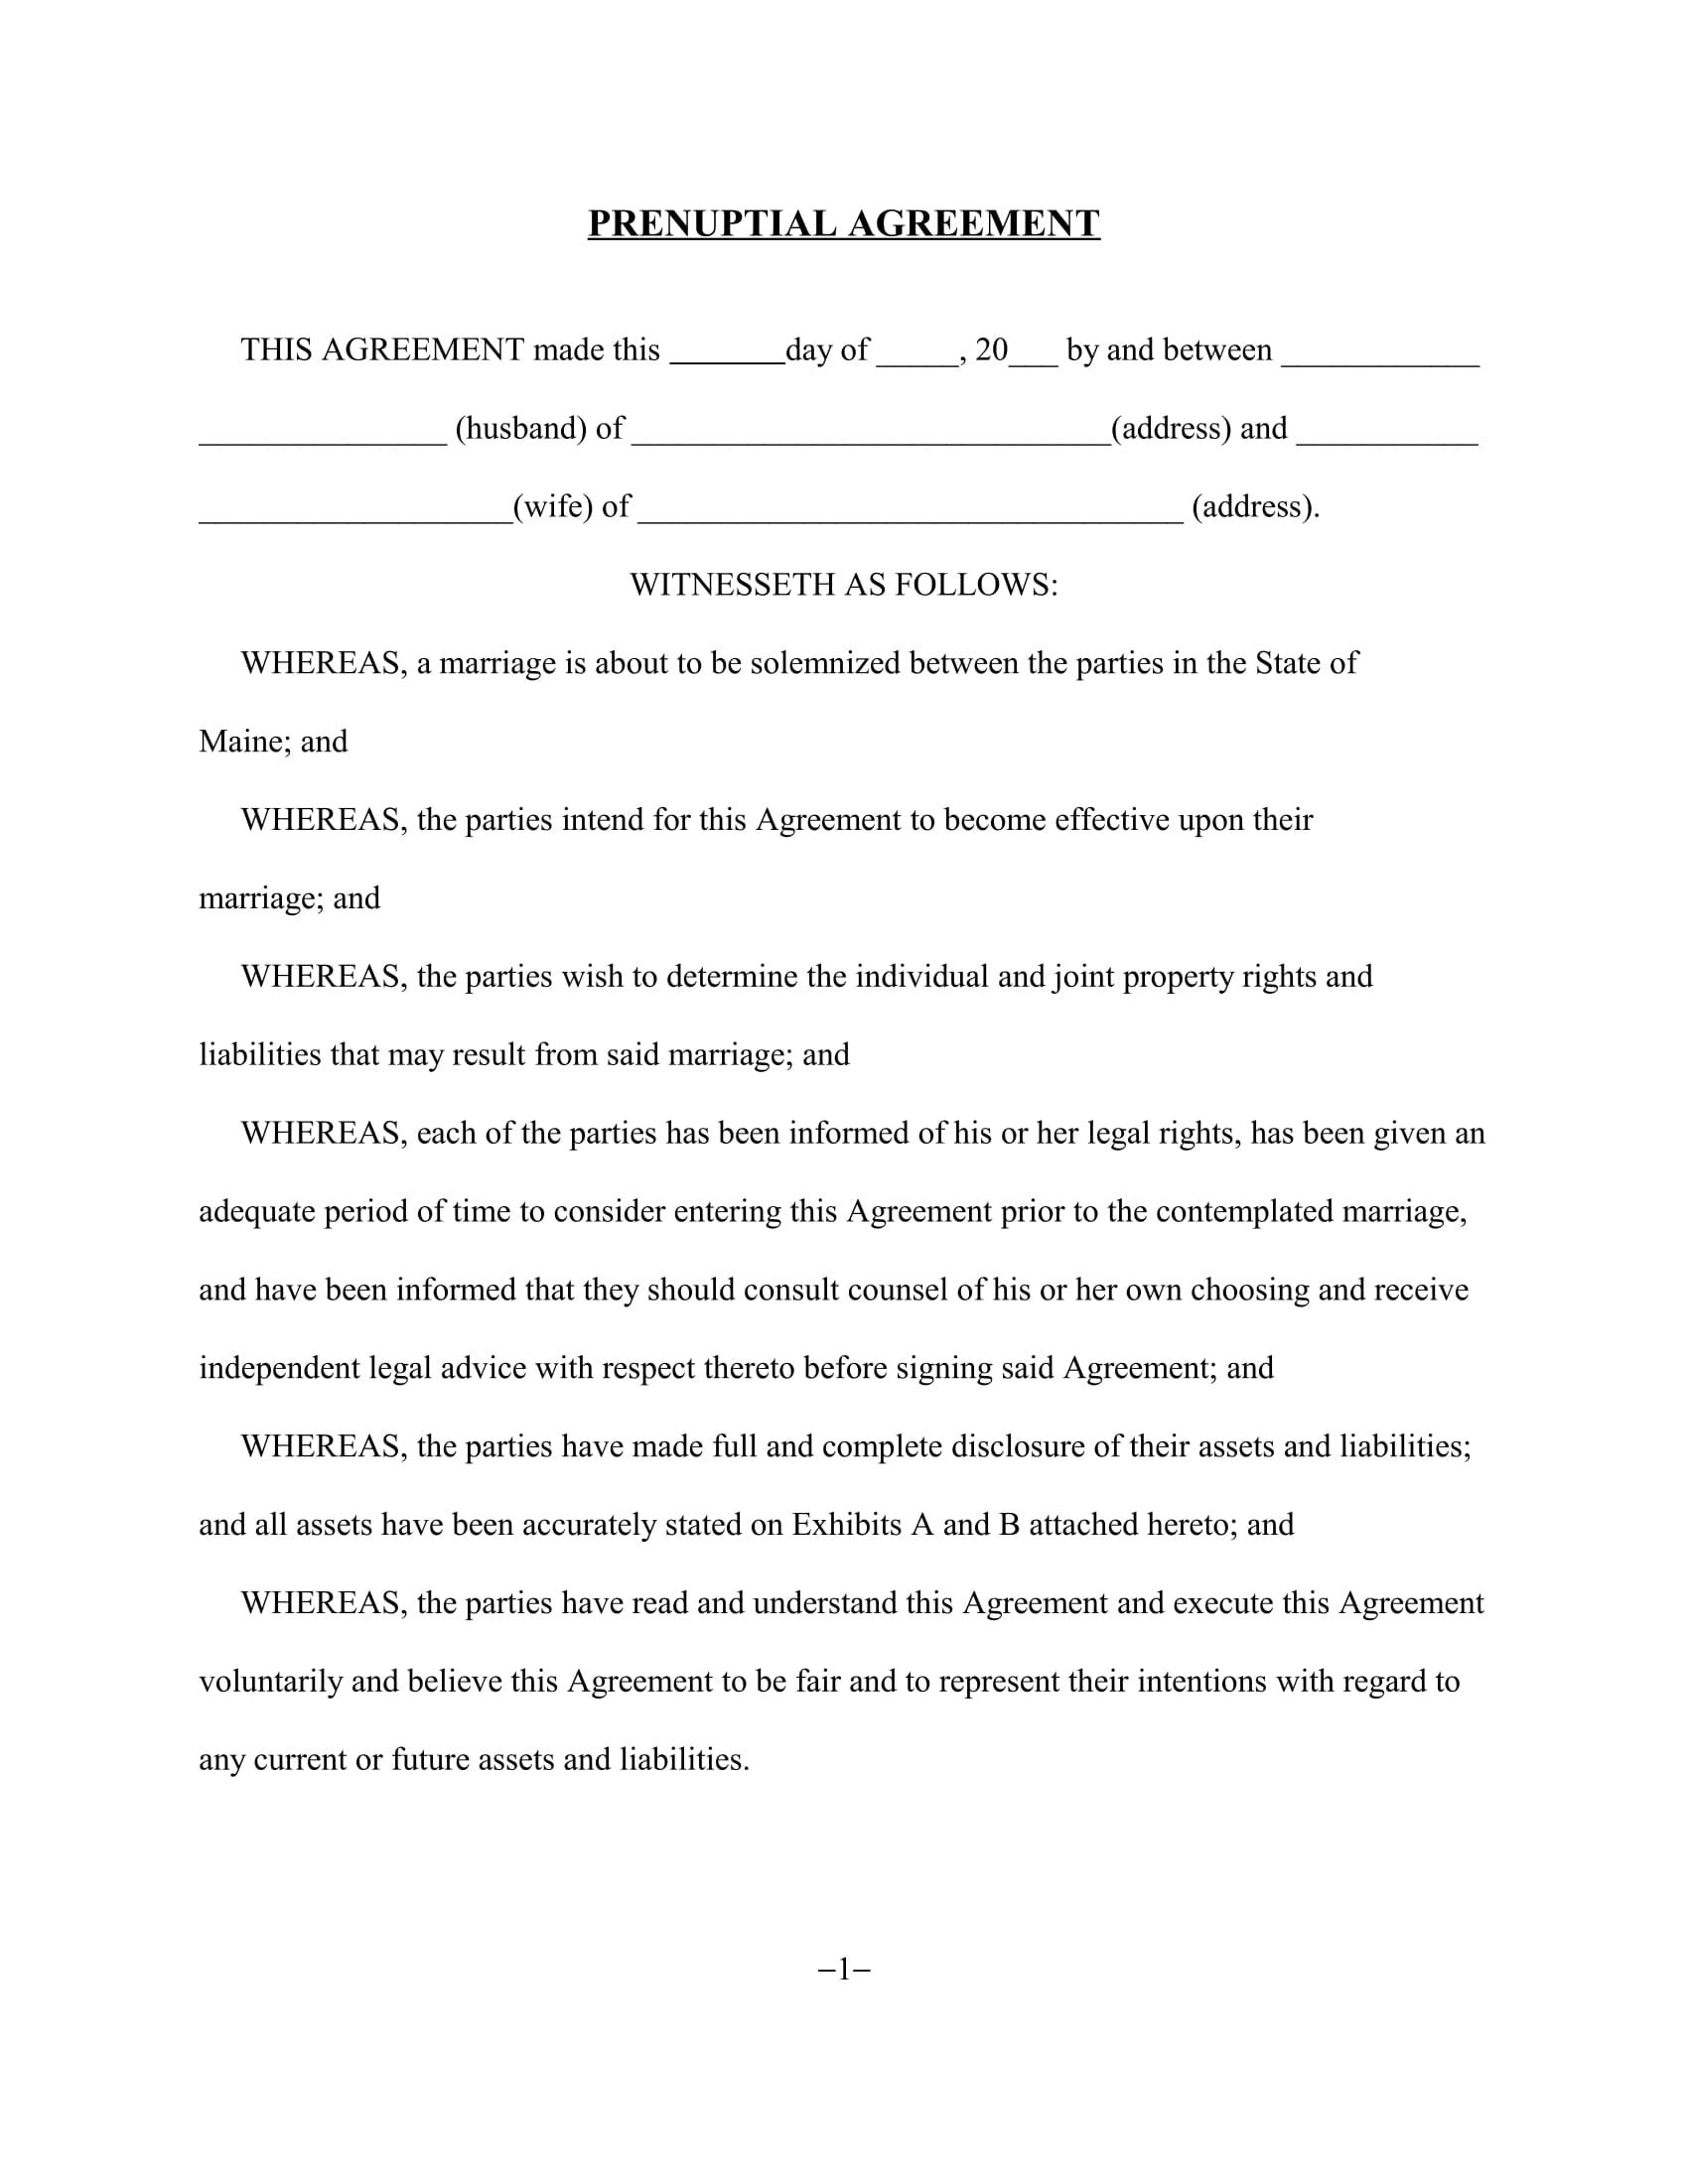 Marriage Termination Agreement 10 Agreement Forms For Handling Financial Decisions And Terms